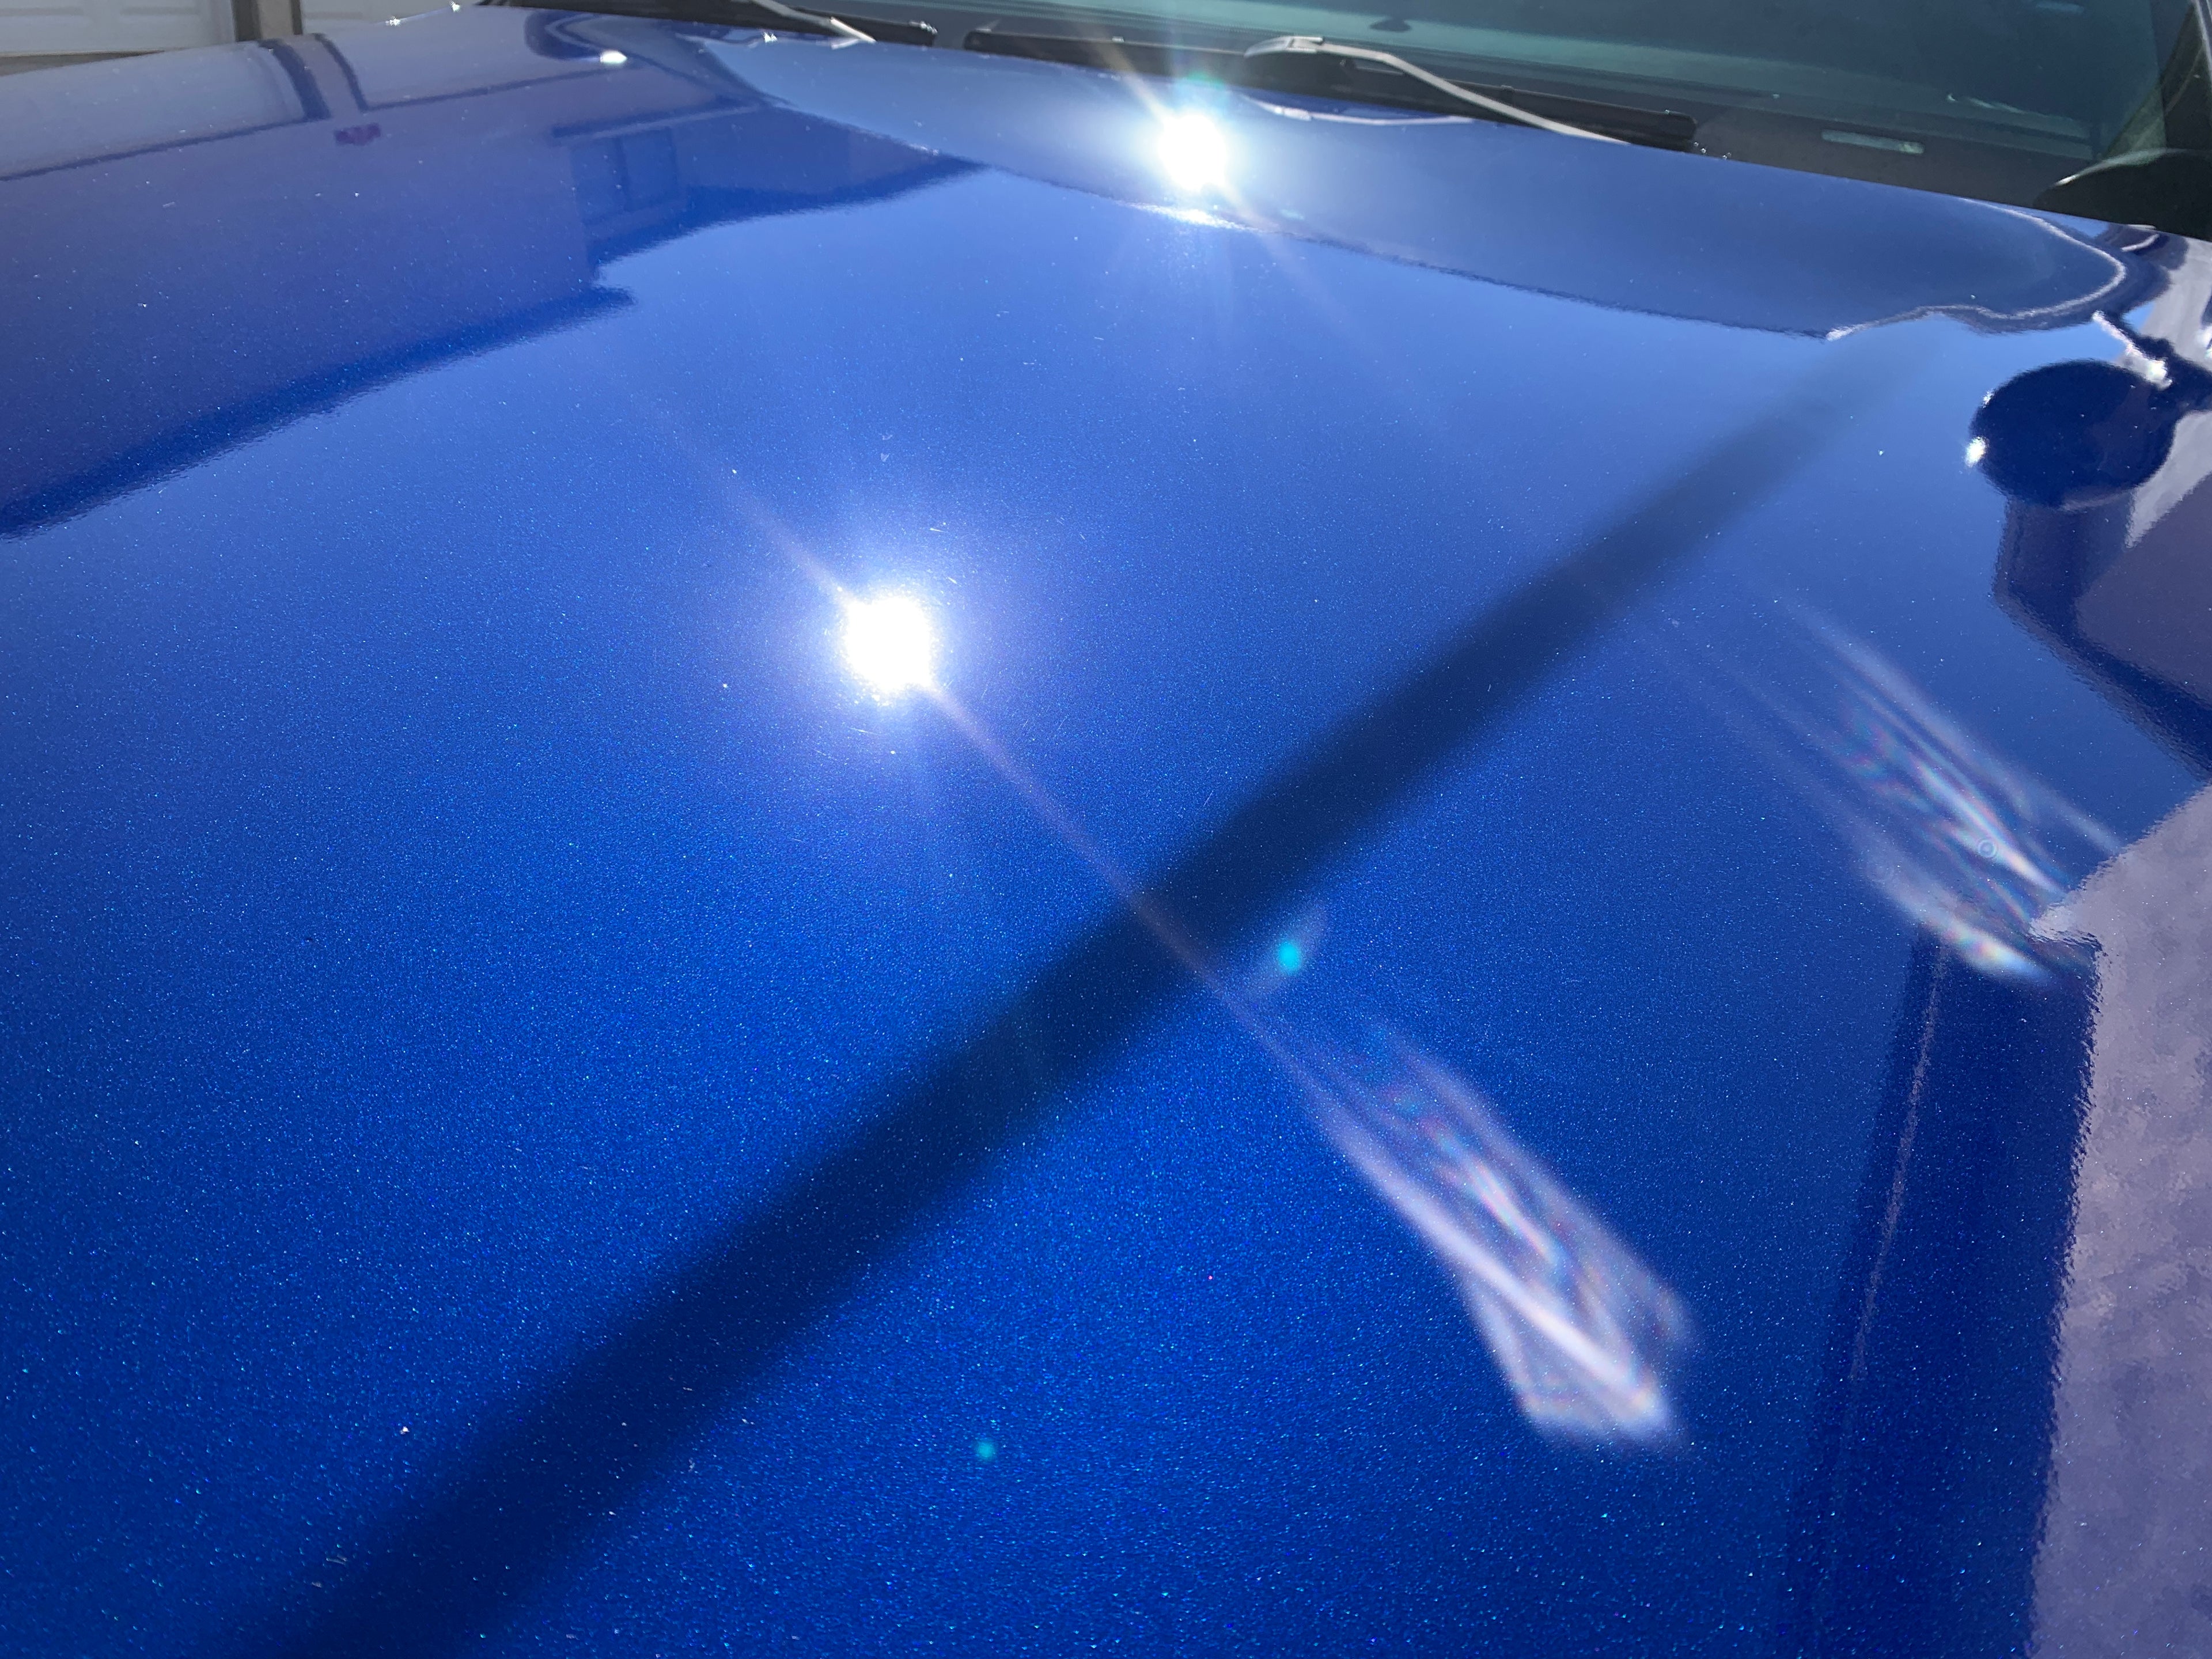 Results after a professional paint correction, paintwork looking flawless